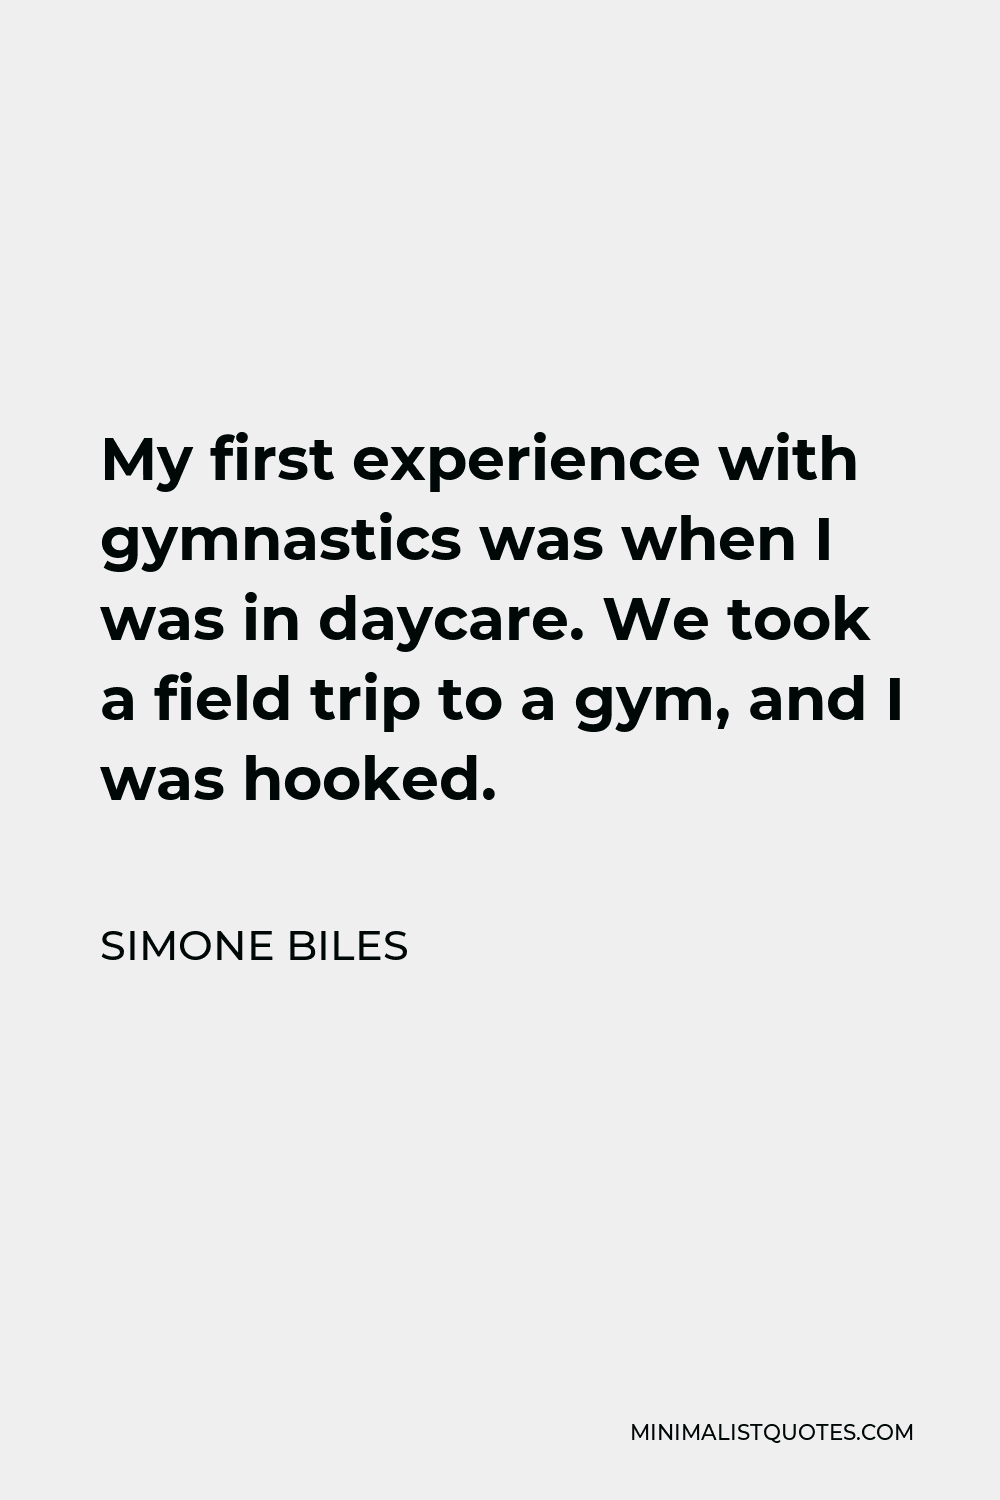 Simone Biles Quote - My first experience with gymnastics was when I was in daycare. We took a field trip to a gym, and I was hooked.